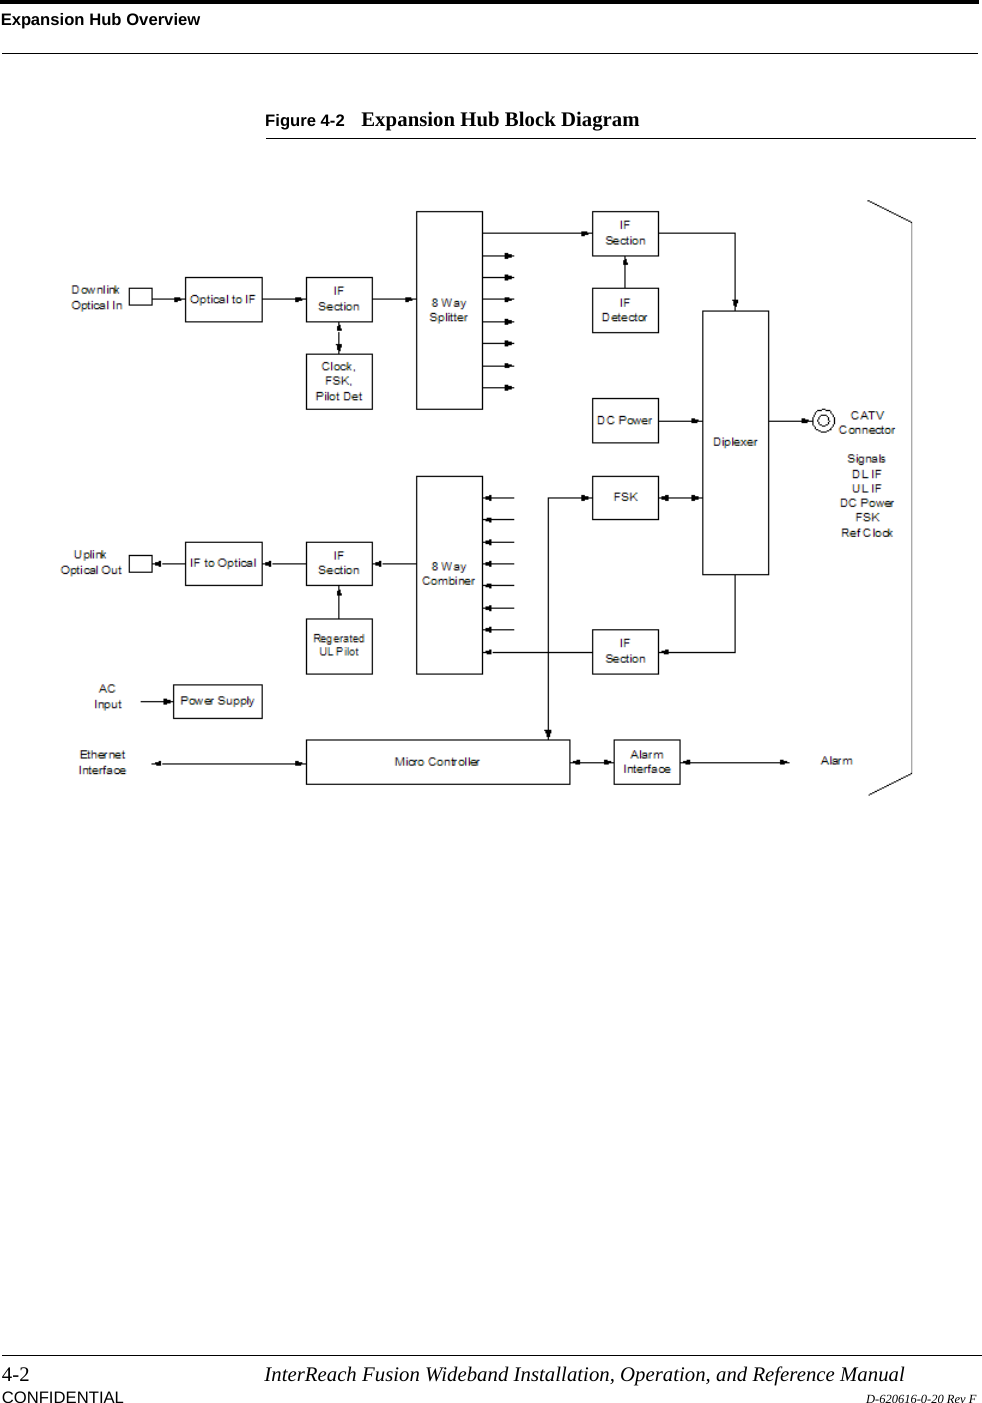 Expansion Hub Overview4-2 InterReach Fusion Wideband Installation, Operation, and Reference ManualCONFIDENTIAL D-620616-0-20 Rev FFigure 4-2 Expansion Hub Block Diagram